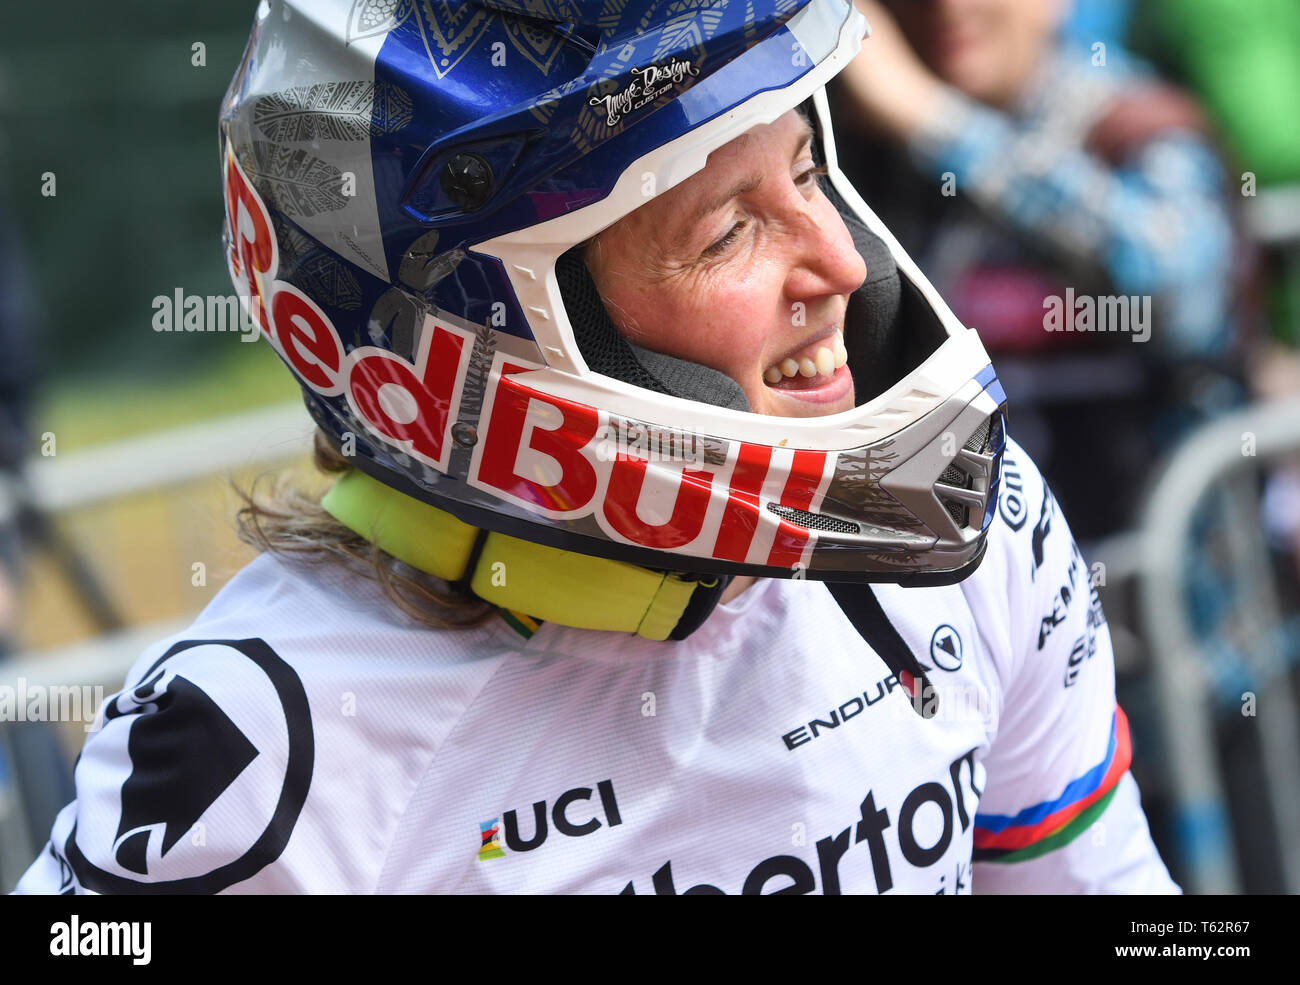 Rachel Atherton of Great Britain is seen at the finishing area of the UCI Mountain Bike World Cup Finals in Maribor. Stock Photo